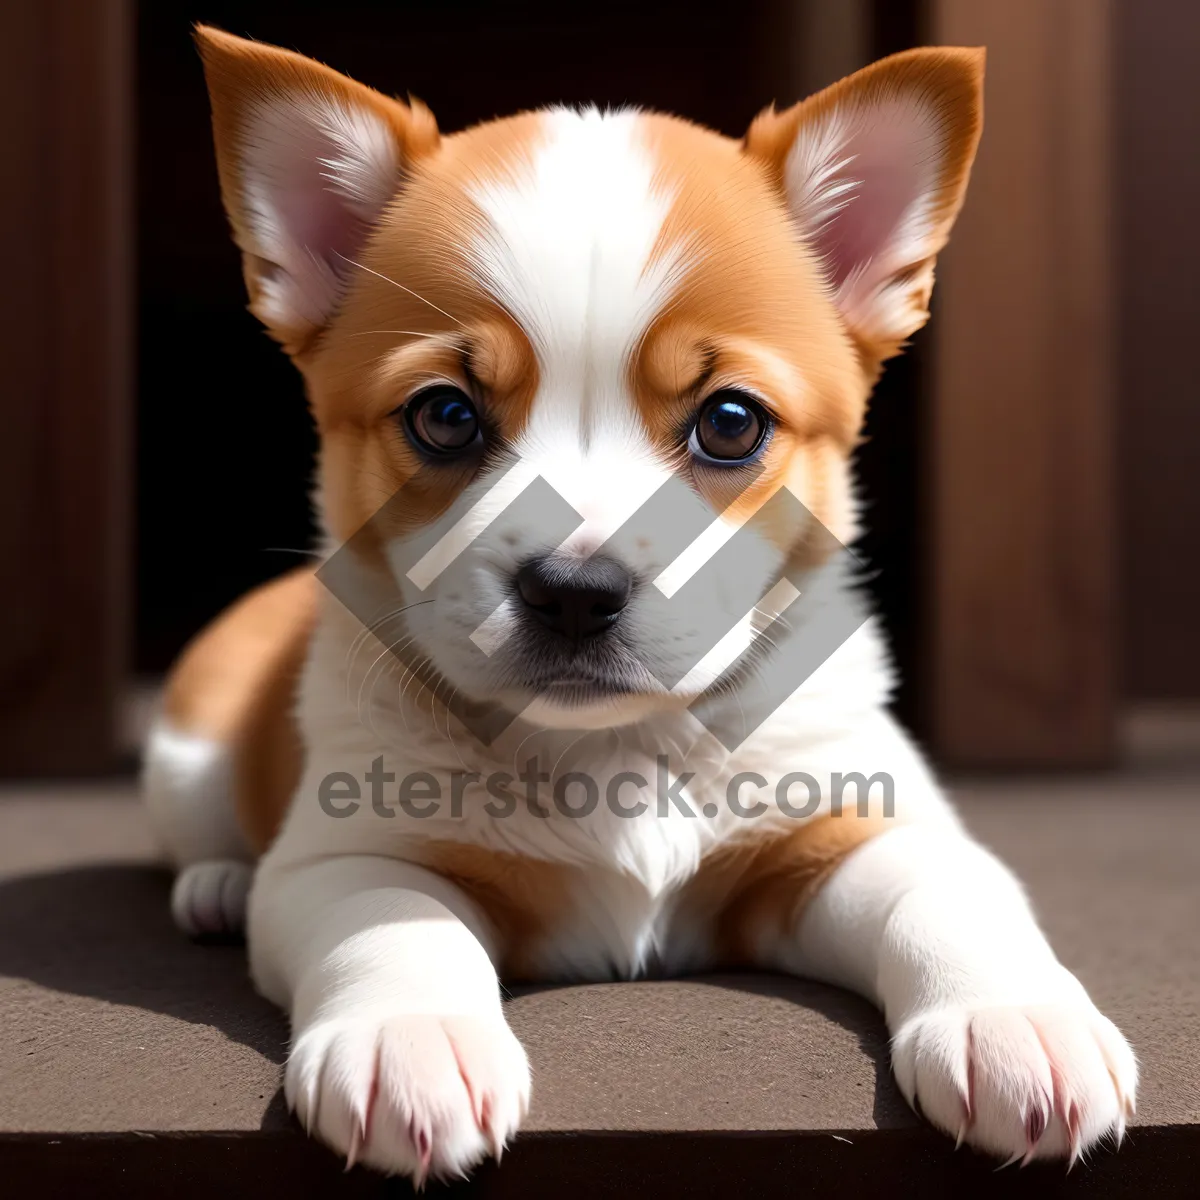 Picture of Adorable Corgi Puppy sitting, looking cute"
or
"Purebred Bulldog and Chihuahua buddies, posing funny